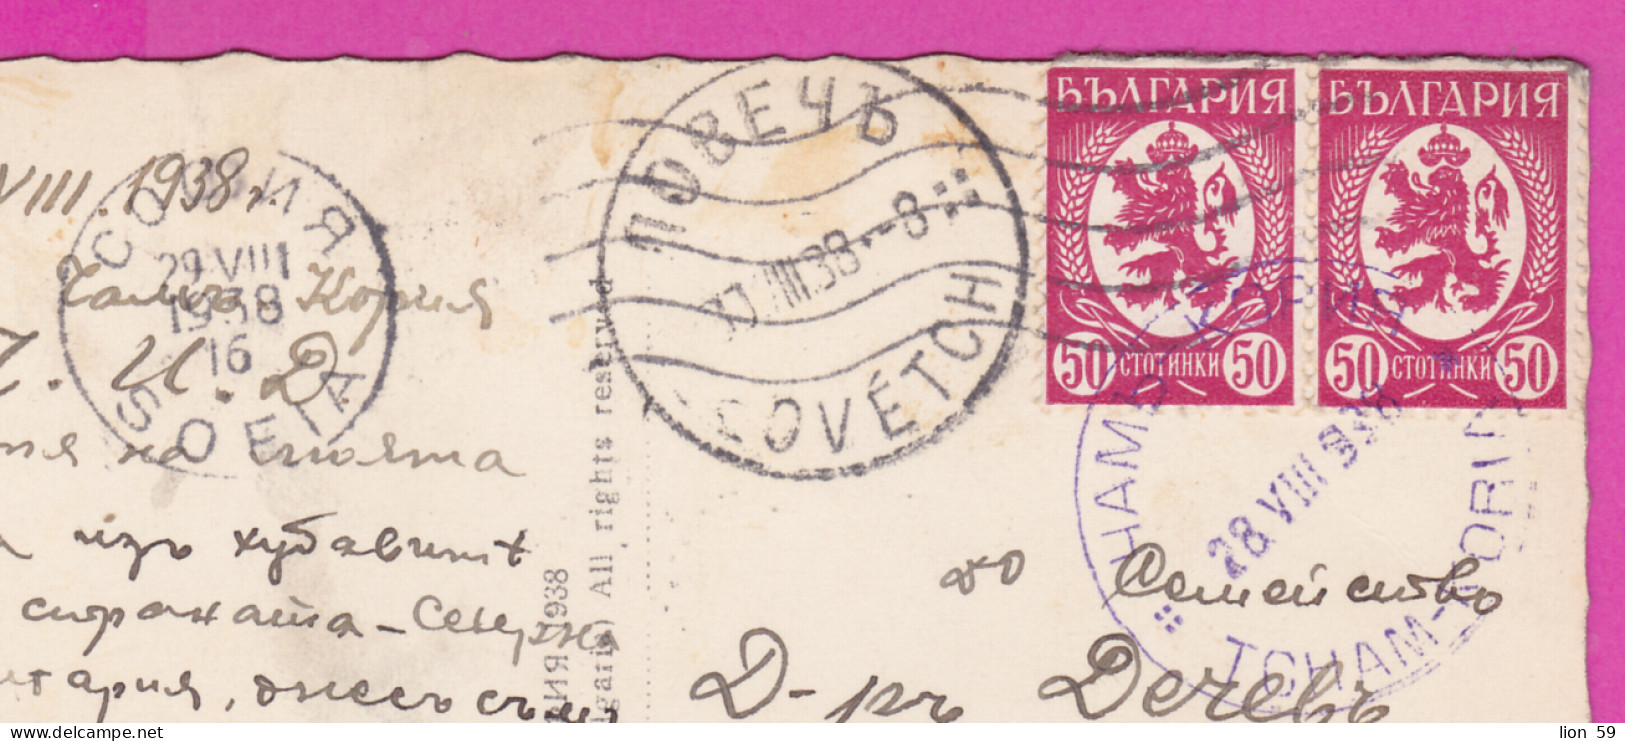 309131 / Bulgaria - Chamkoria (Borovets) - View From The Resort 66 PC 1938 USED 50+50 St. Lion Lowe Sofia - Lovech  - Covers & Documents